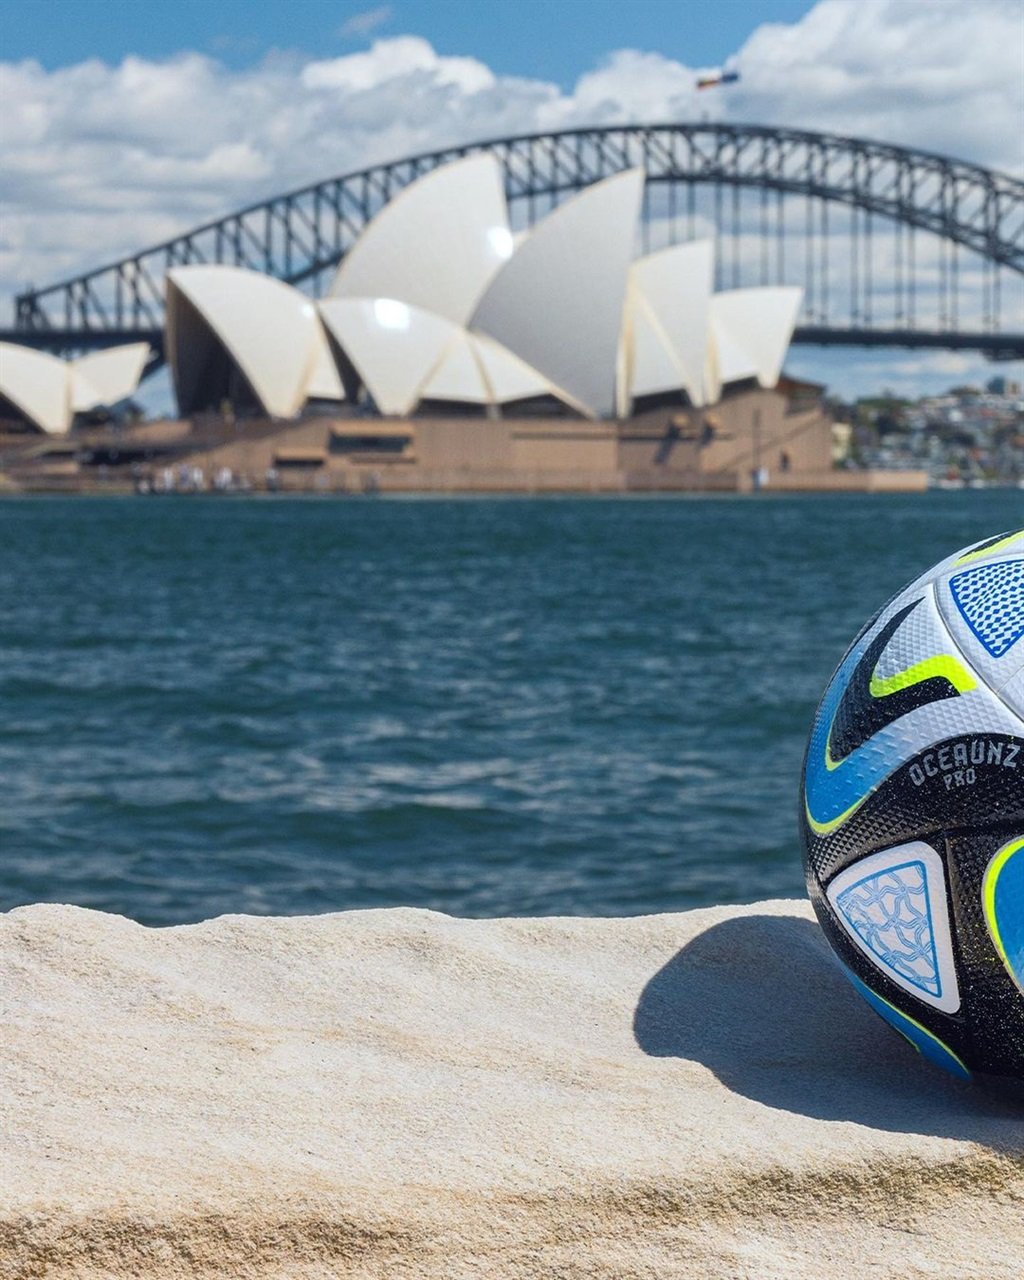 'OCEAUNZ' The official match ball for the 2023 FIF